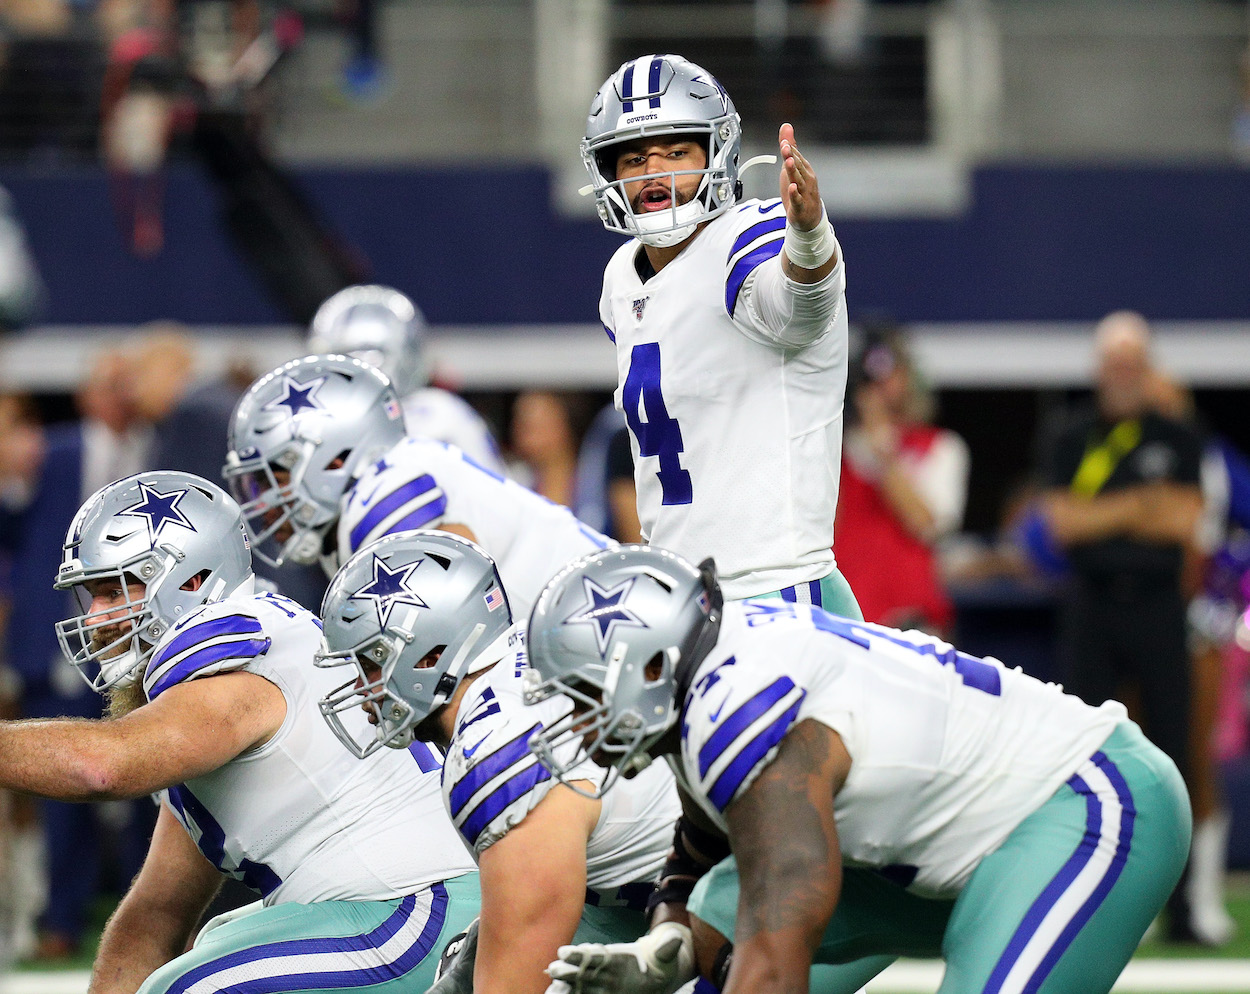 Dak Prescott of the Dallas Cowboys with the offensive line against the Philadelphia Eagles at AT&T Stadium on October 20, 2019 in Arlington, Texas.